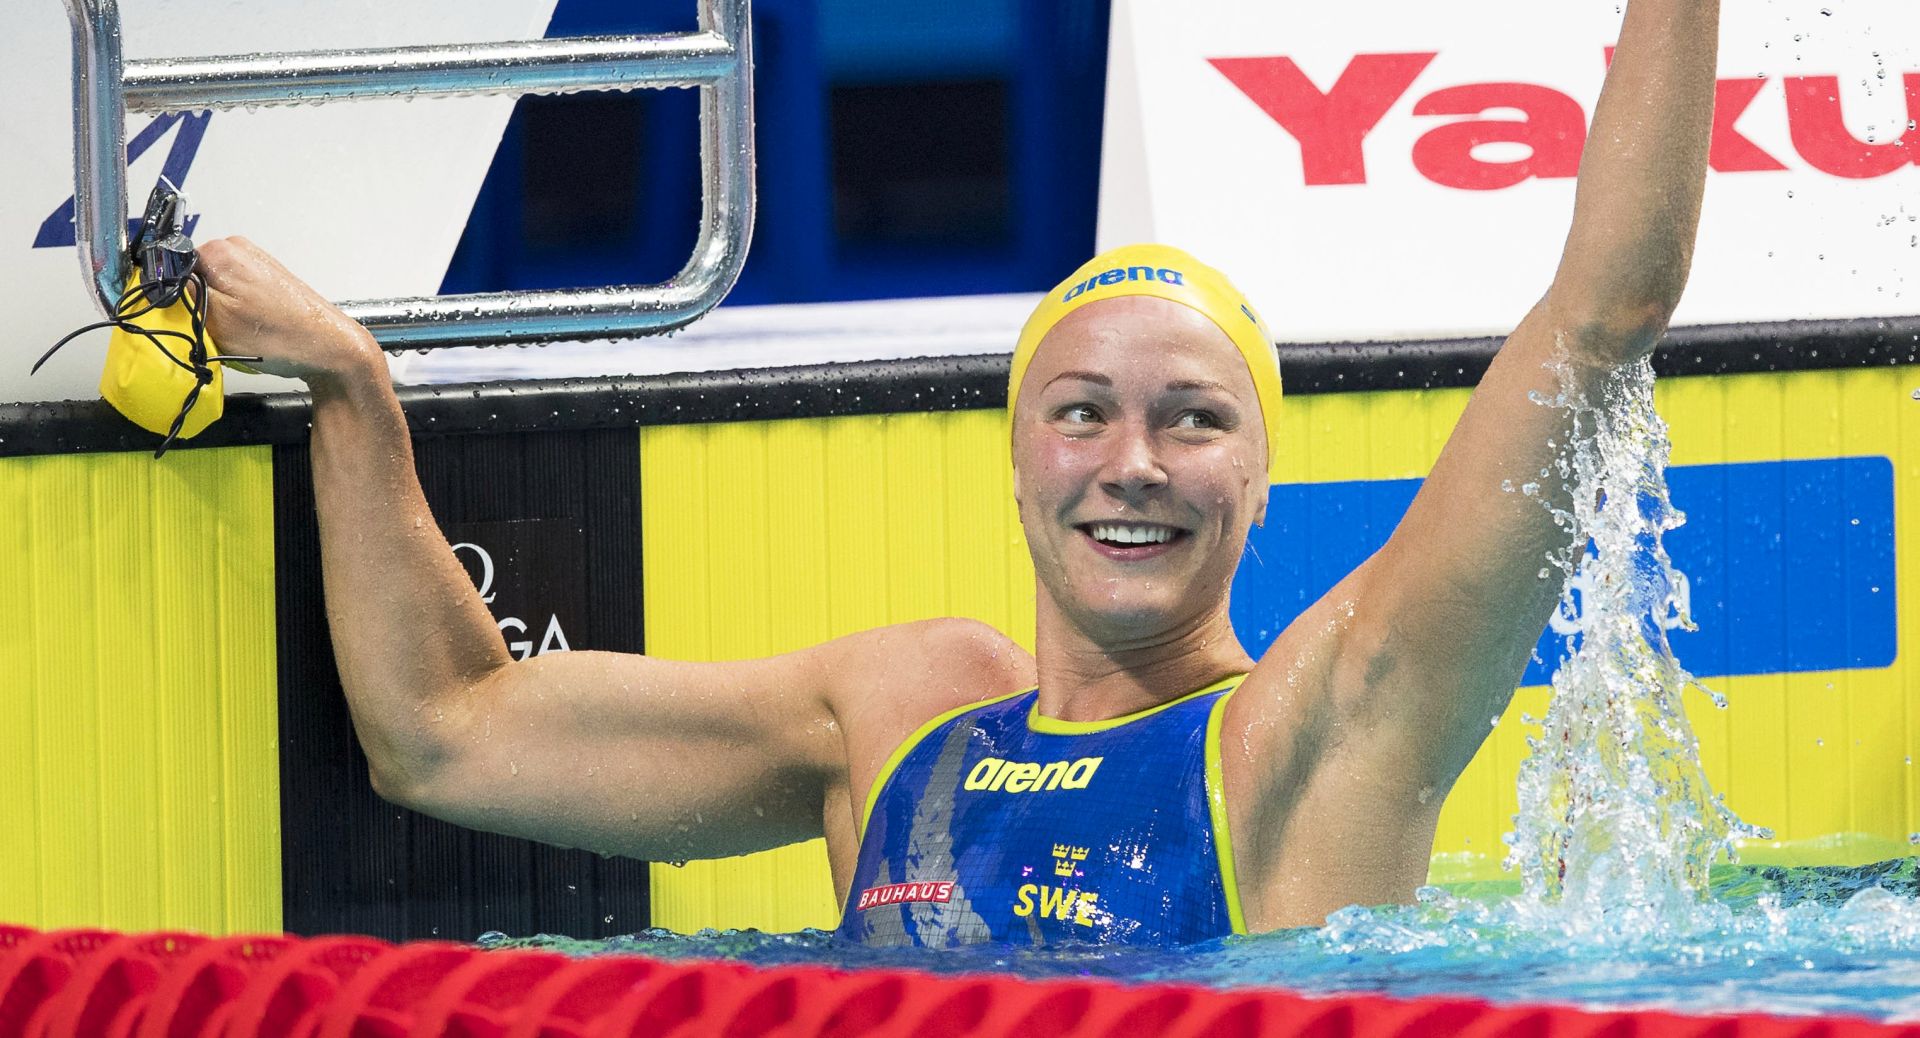 epa06116467 Sarah Sjostrom of Sweden celebrates after setting a New World Record time in the women's 50m Freestyle semi final during the 17th FINA Swimming World Championships in the Duna Arena in Budapest, Hungary, 29 July 2017.  EPA/PATRICK B. KRAEMER